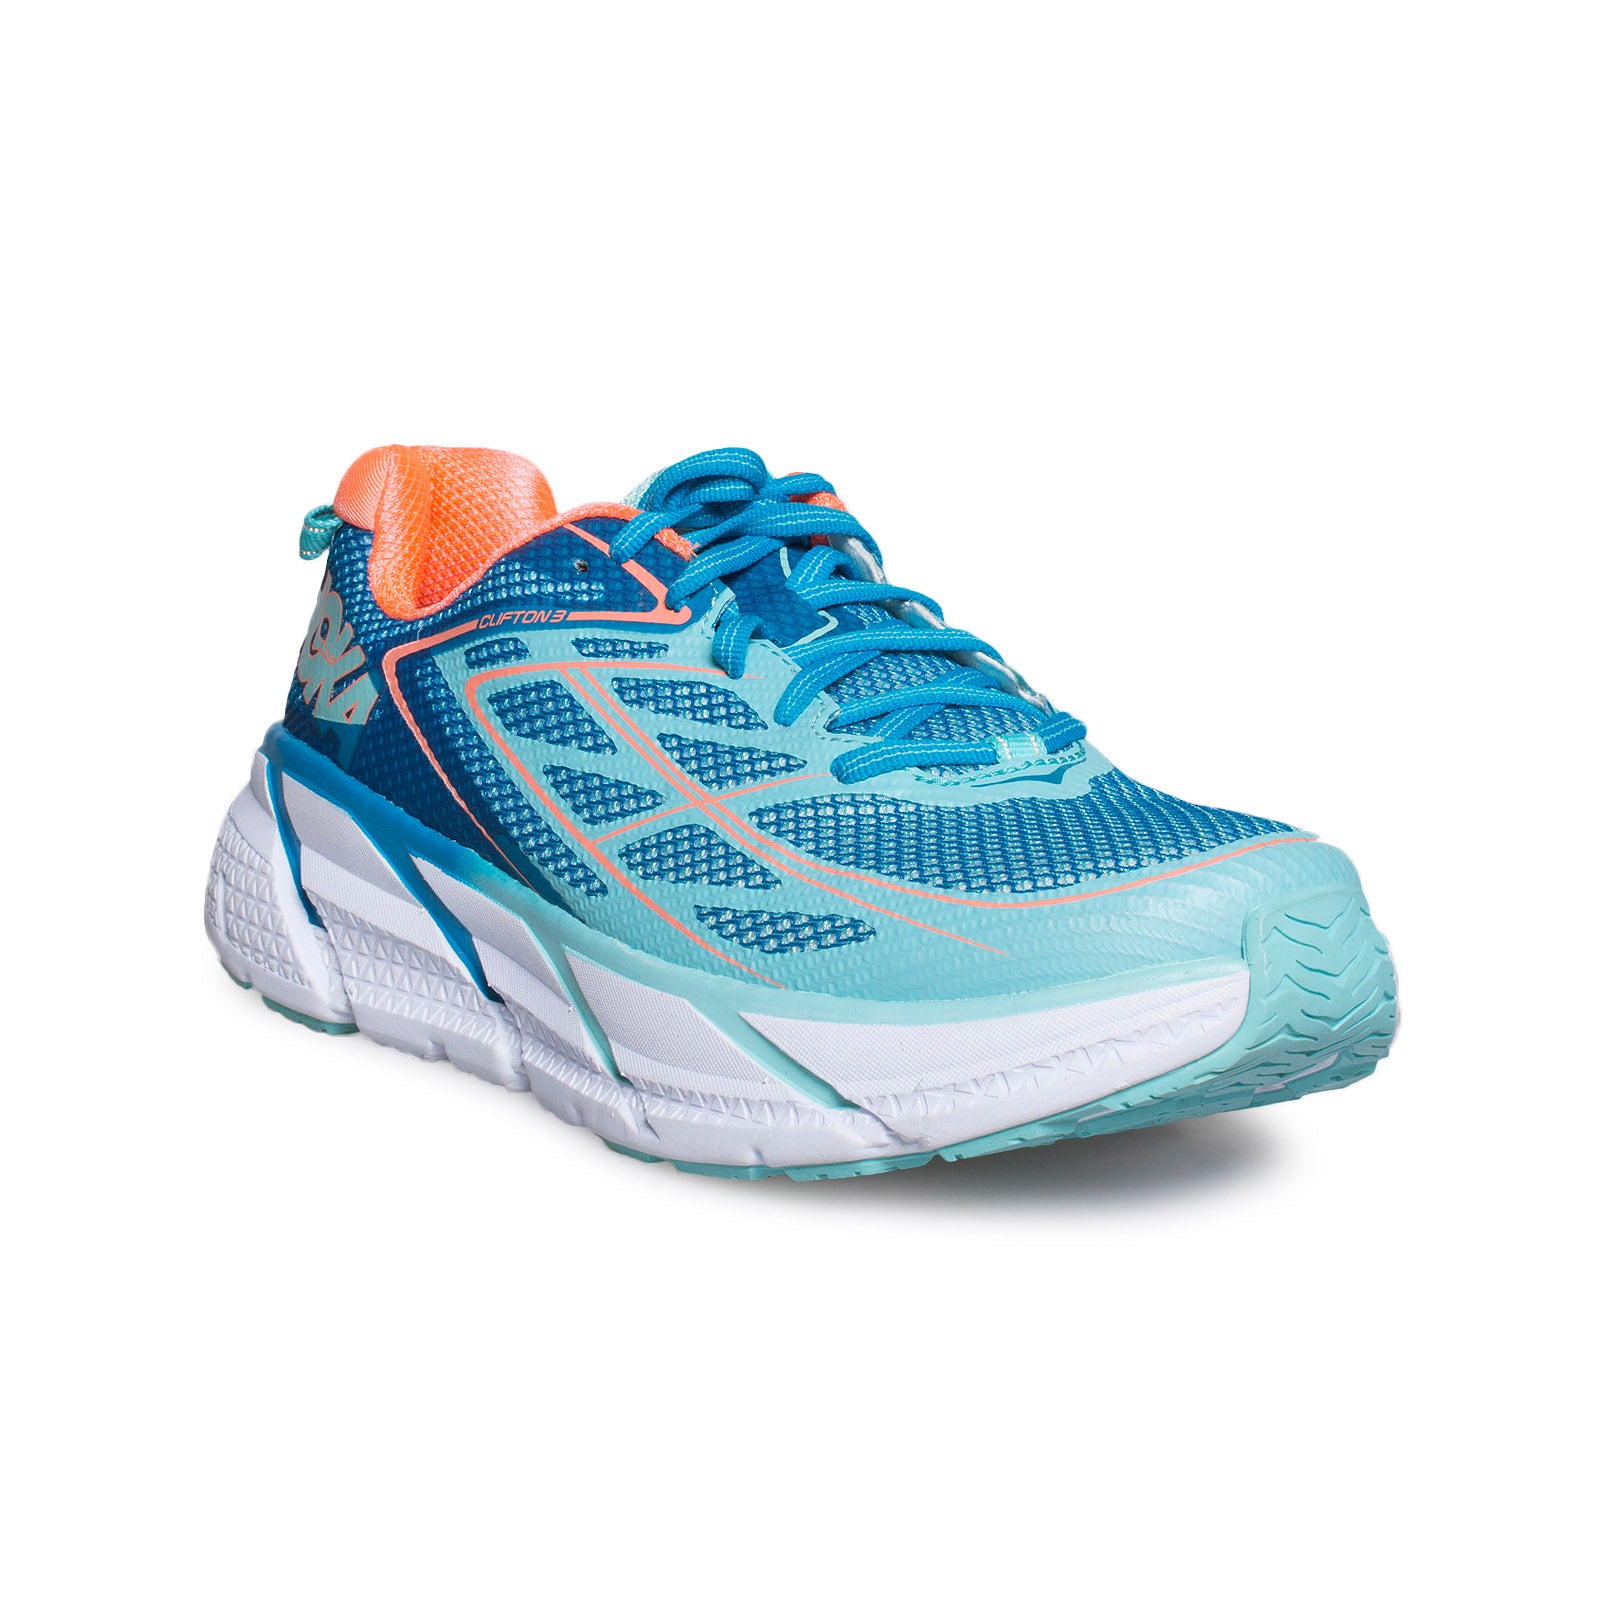 Hoka One One Clifton 3 Blue Jewel / Neon Coral Running Shoes - Women's ...